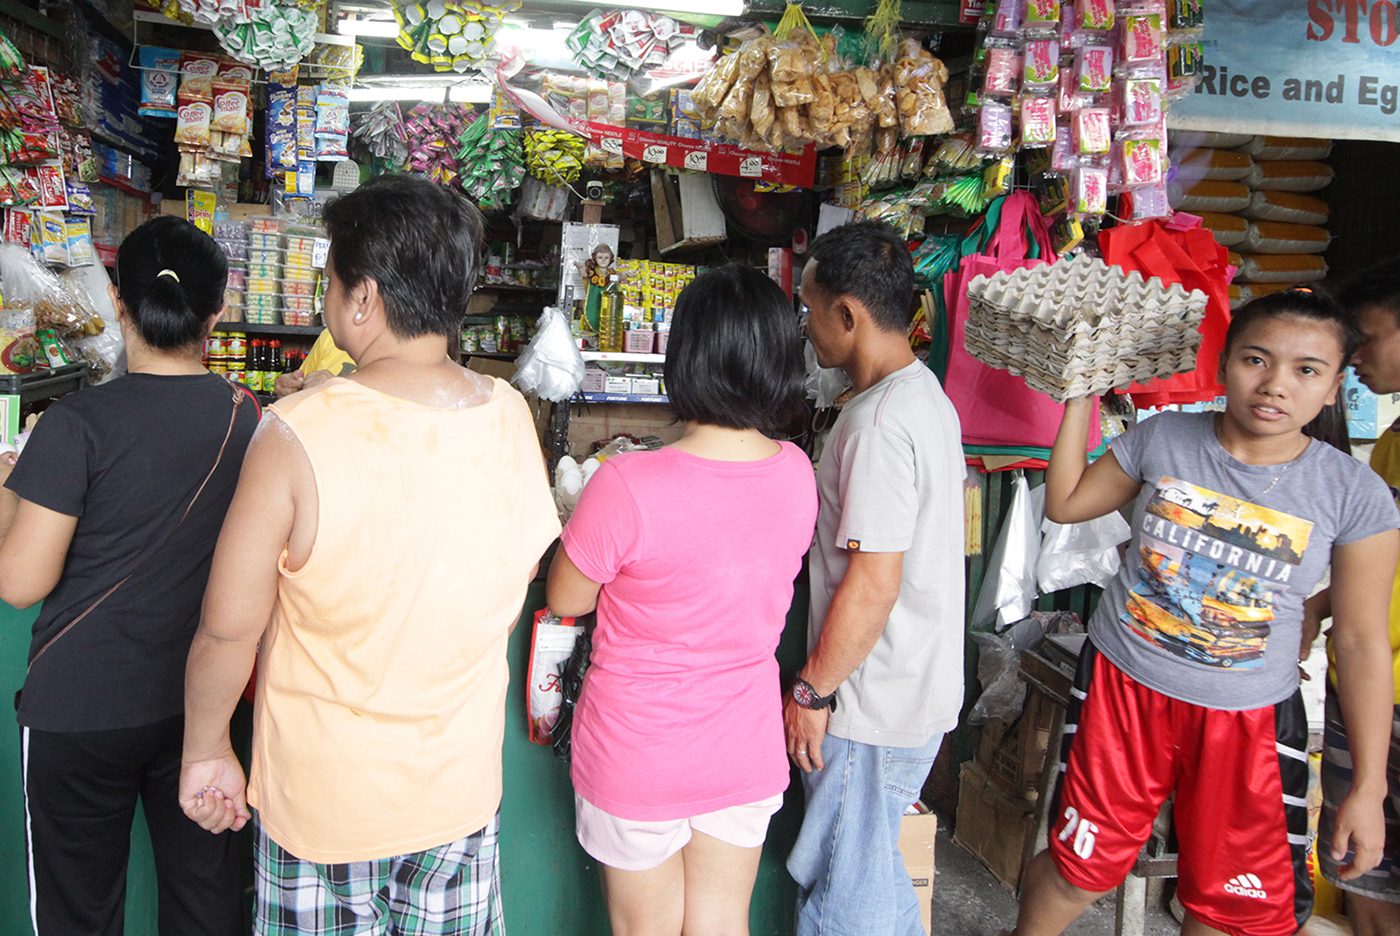 Inflation remains low at 2.4% in July 2019